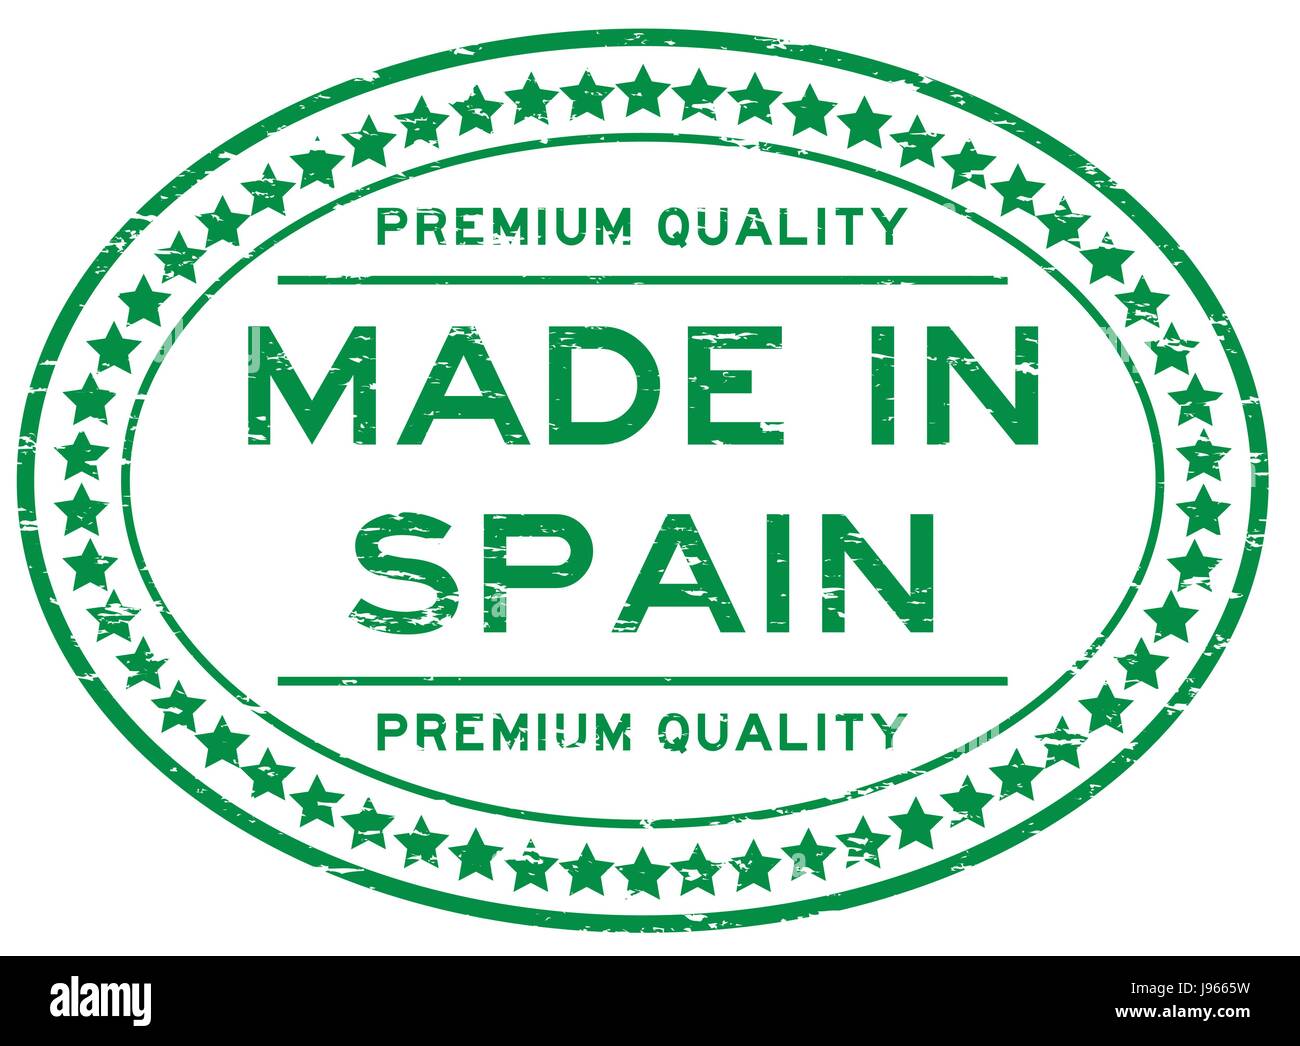 Grunge green premium quality made in spain with star icon oval rubber ...